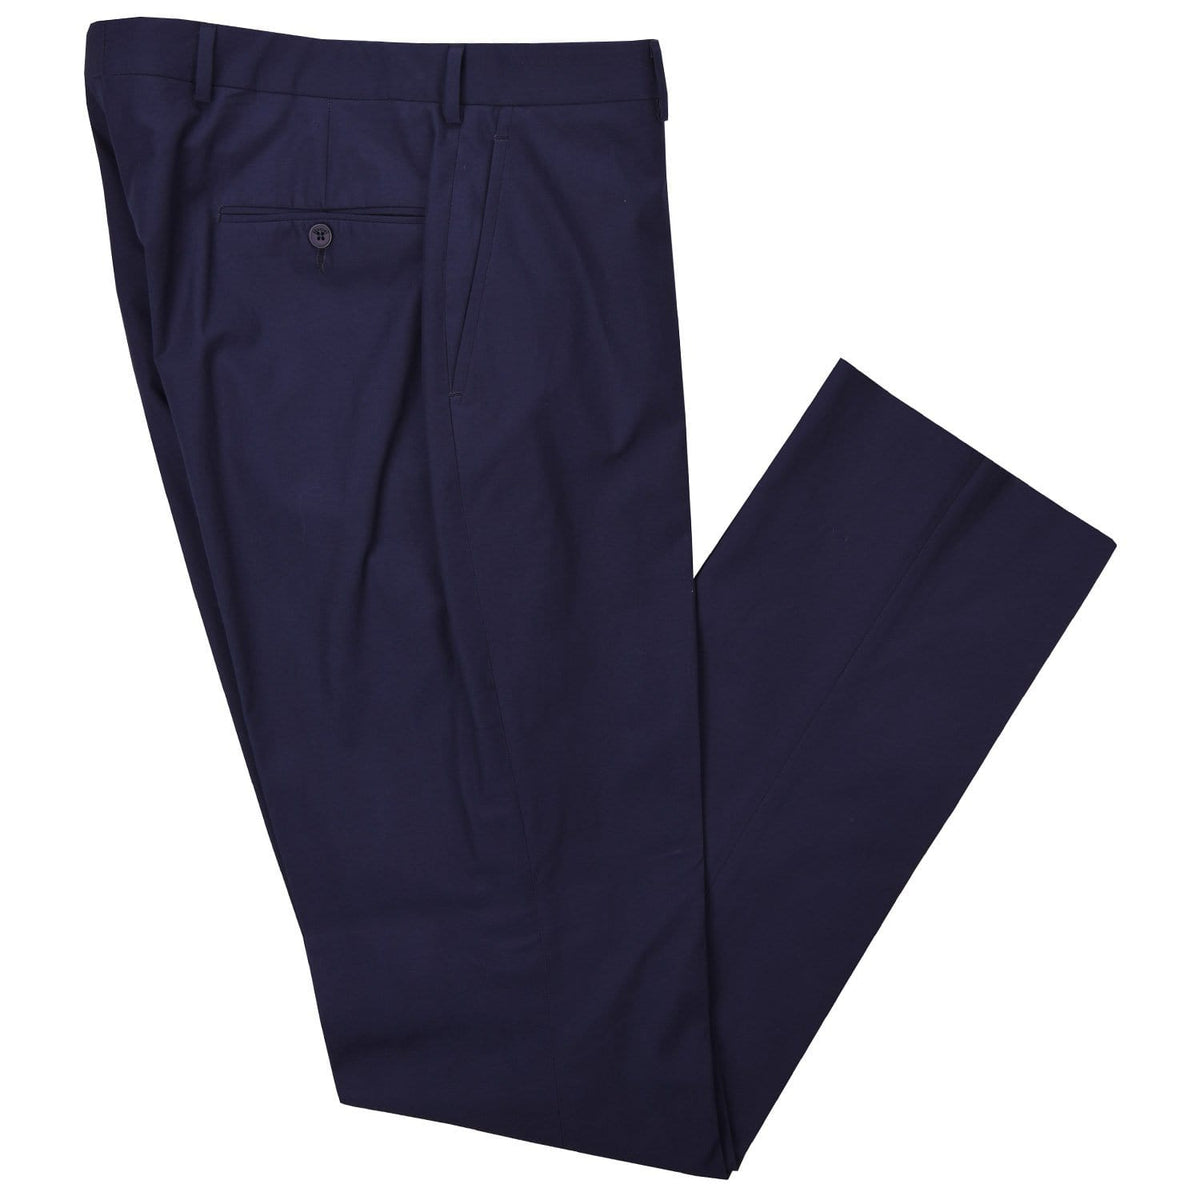 Leave the traditional khakis at the office and let our year round 100% cotton poplin pants keep Spring in your step all year long.